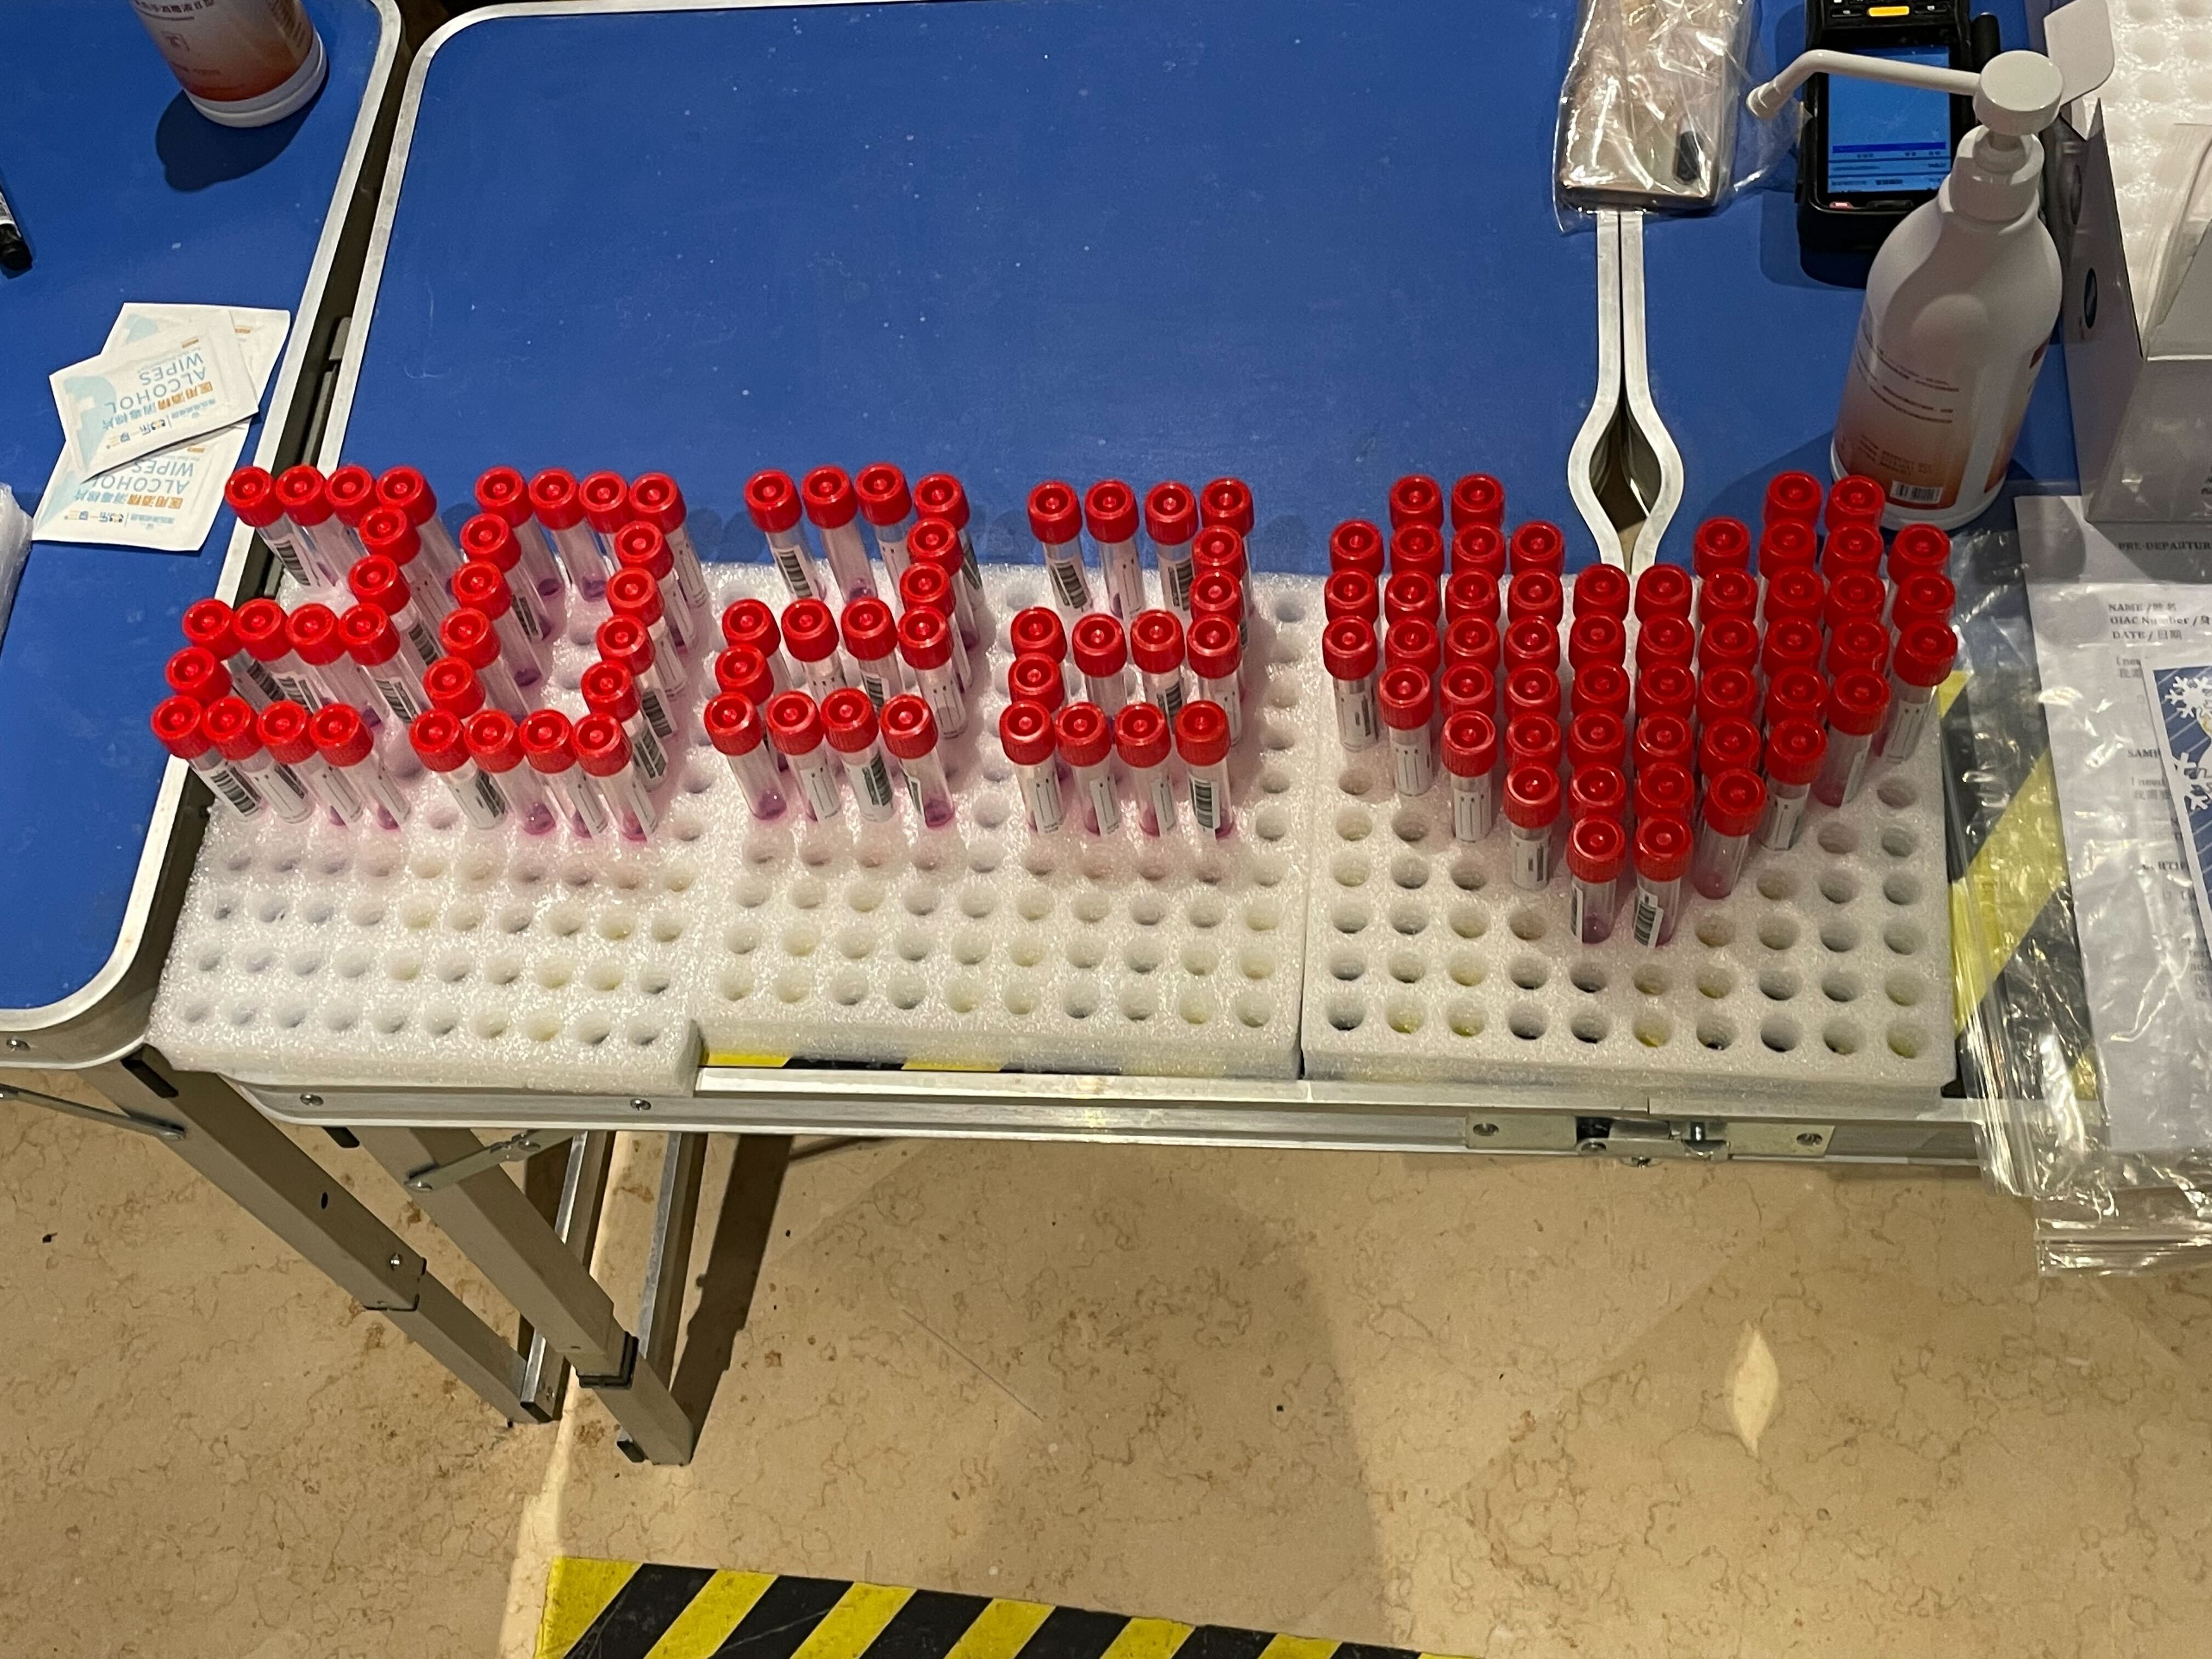 Testing vials arranged to read "2022" and a heart shape, at a Covid-19 testing station inside the Beijing Olympic bubble.